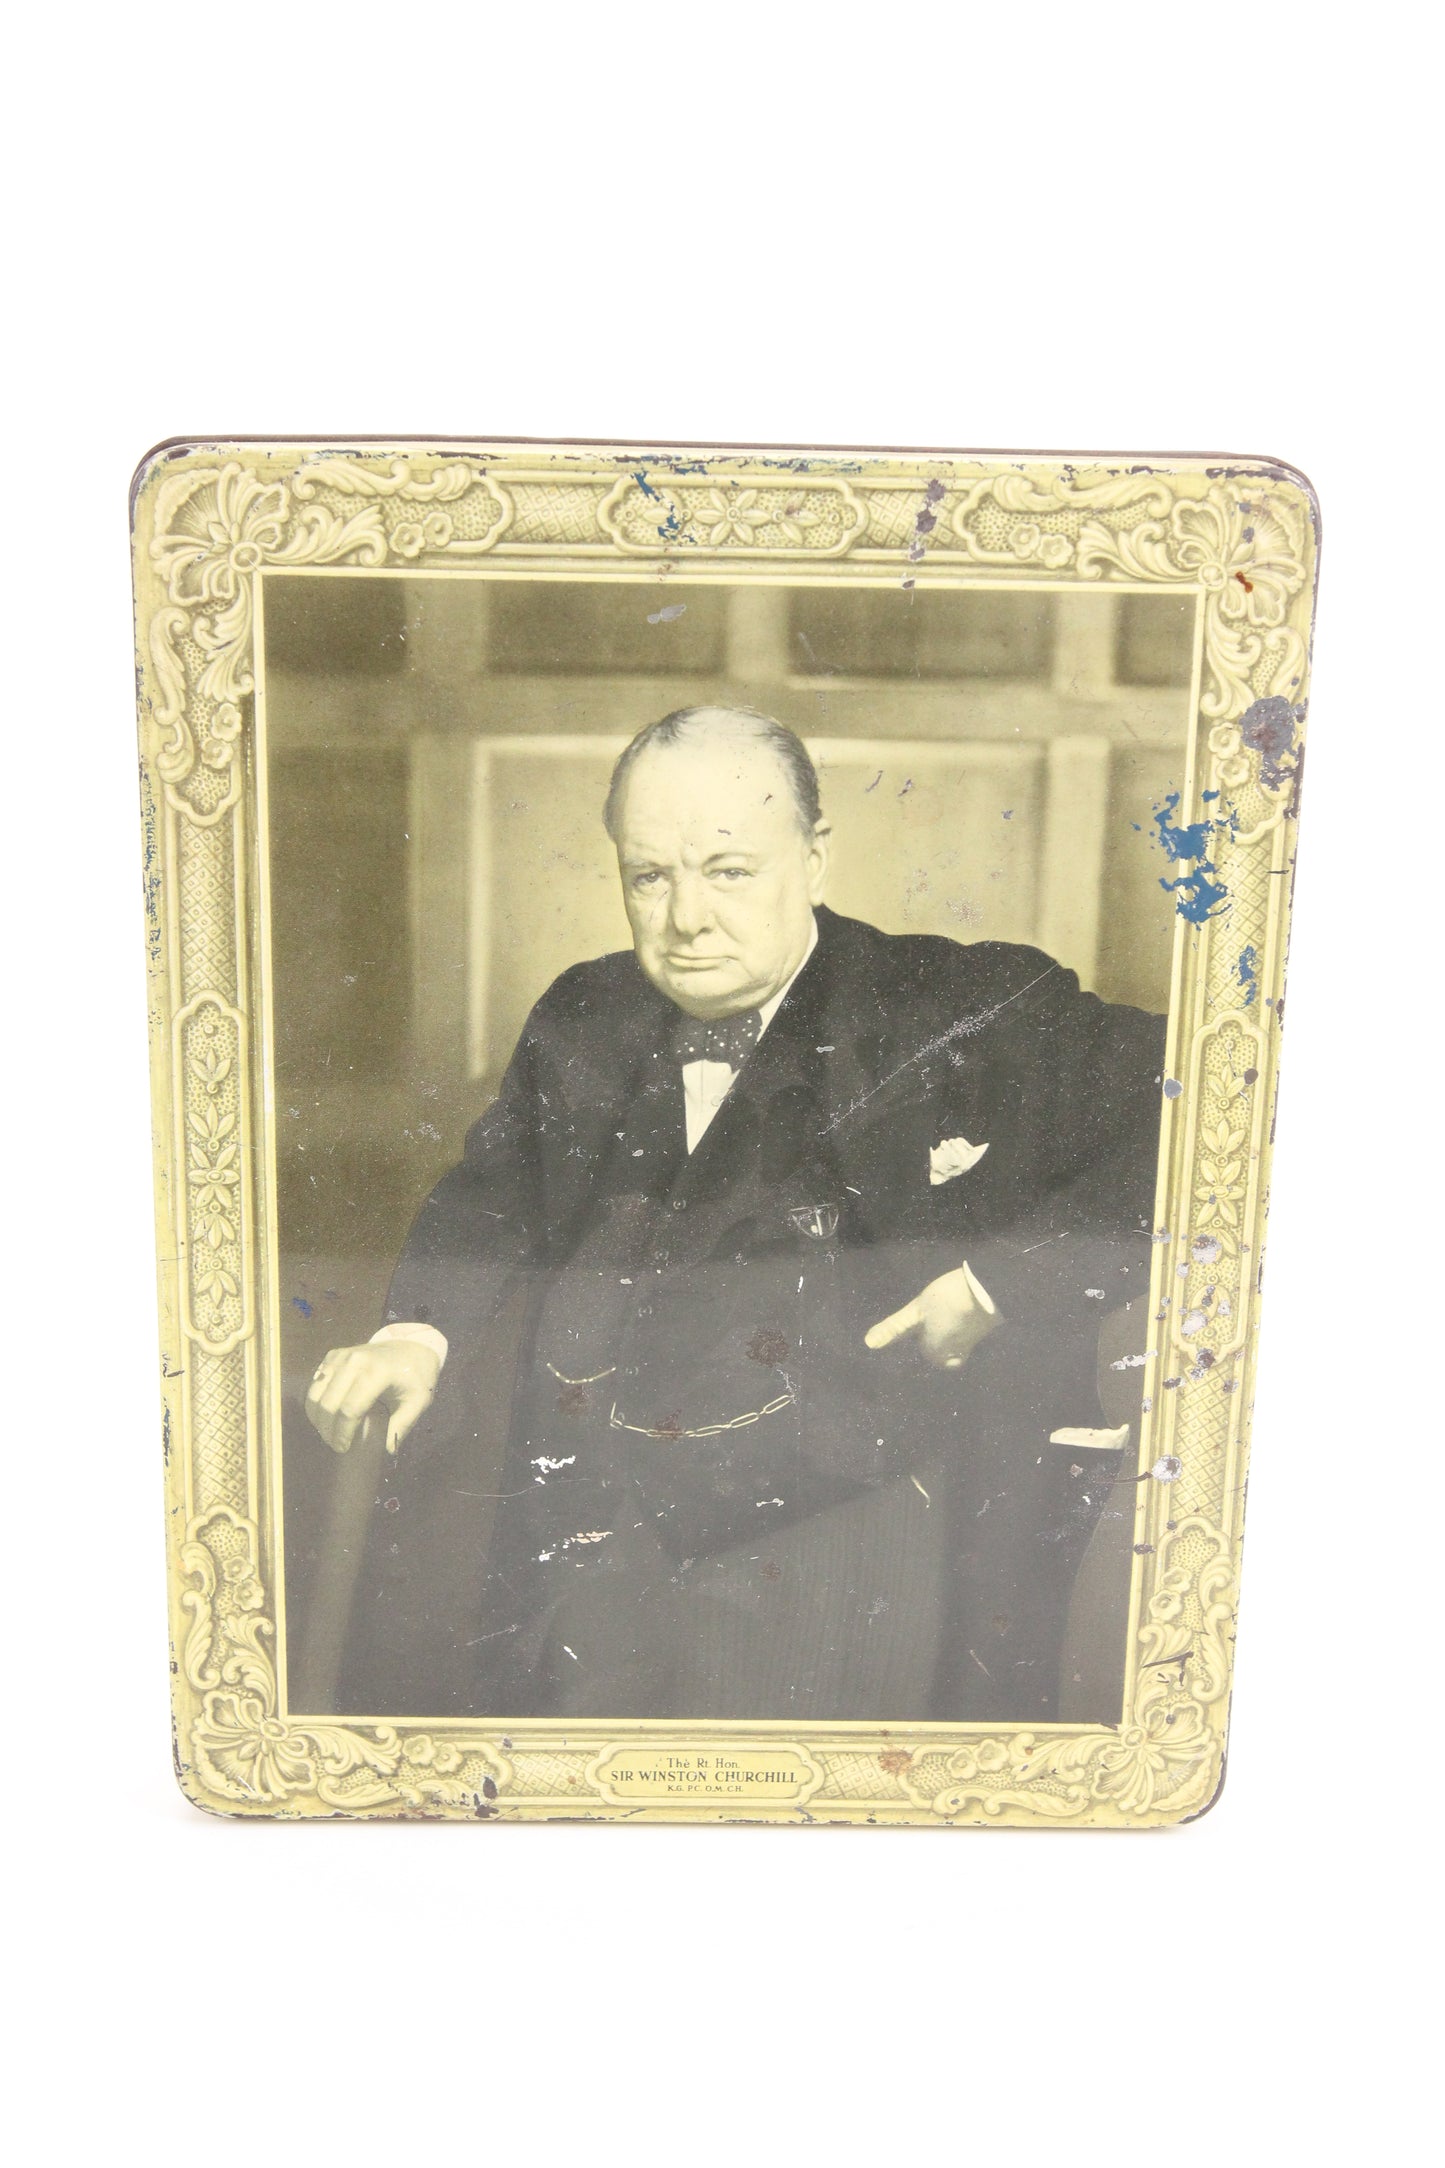 Sir Winston Churchill Huntley & Palmers Biscuits Tin, England